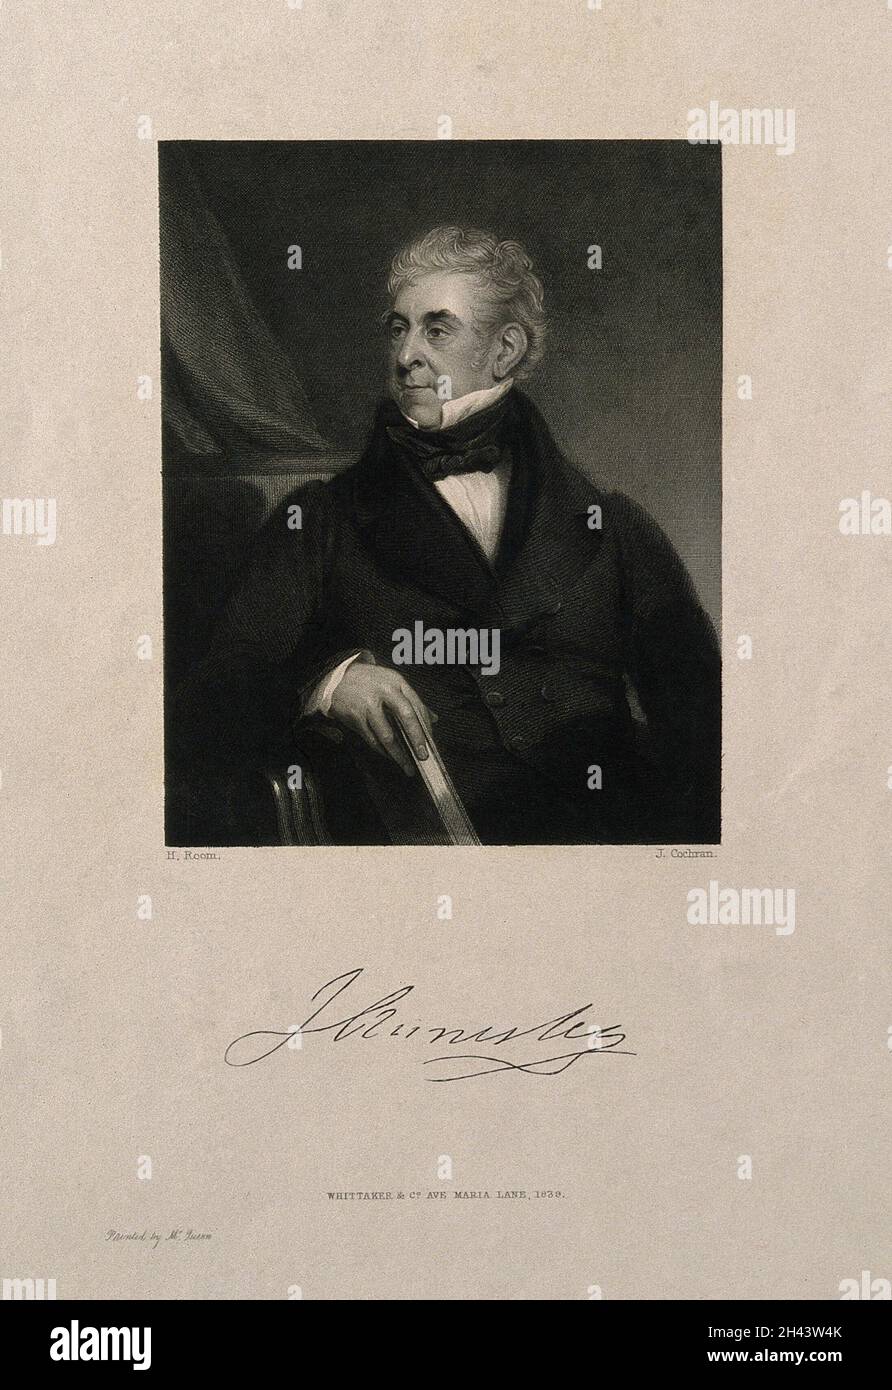 Sir James Annesley. Stipple engraving by J. Cochran after H. Room. Stock Photo